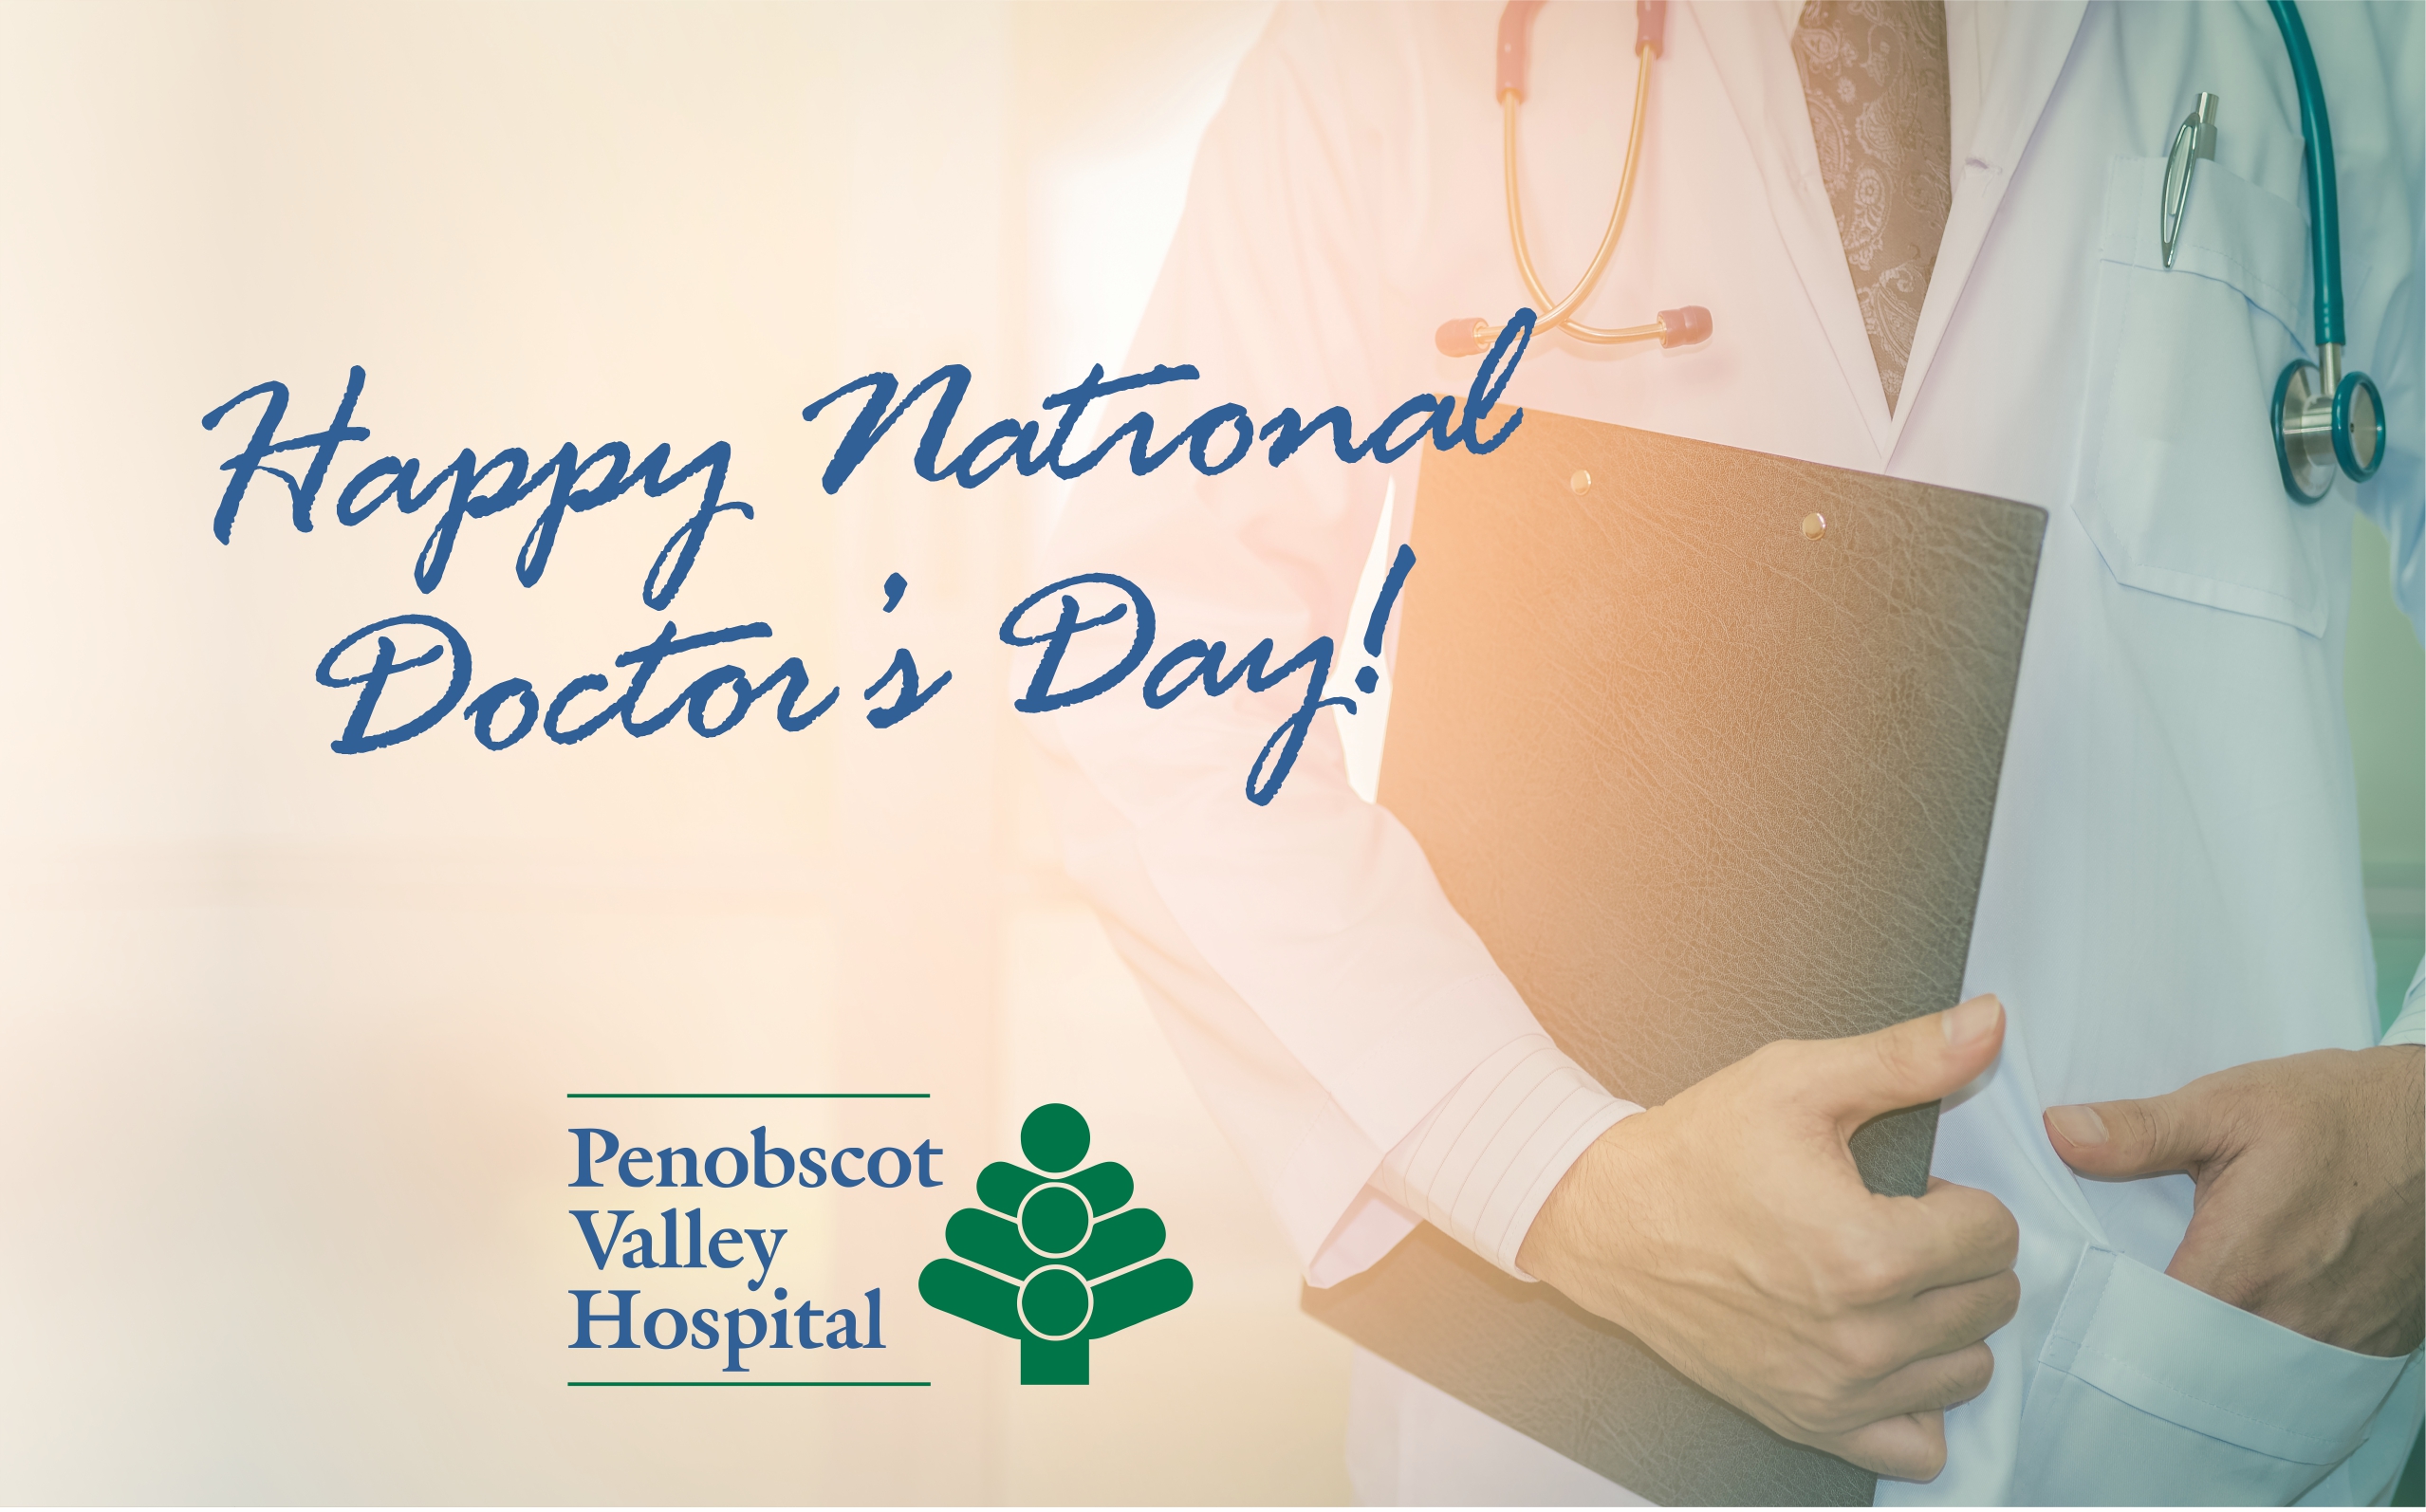 Happy National Doctor’s Day!